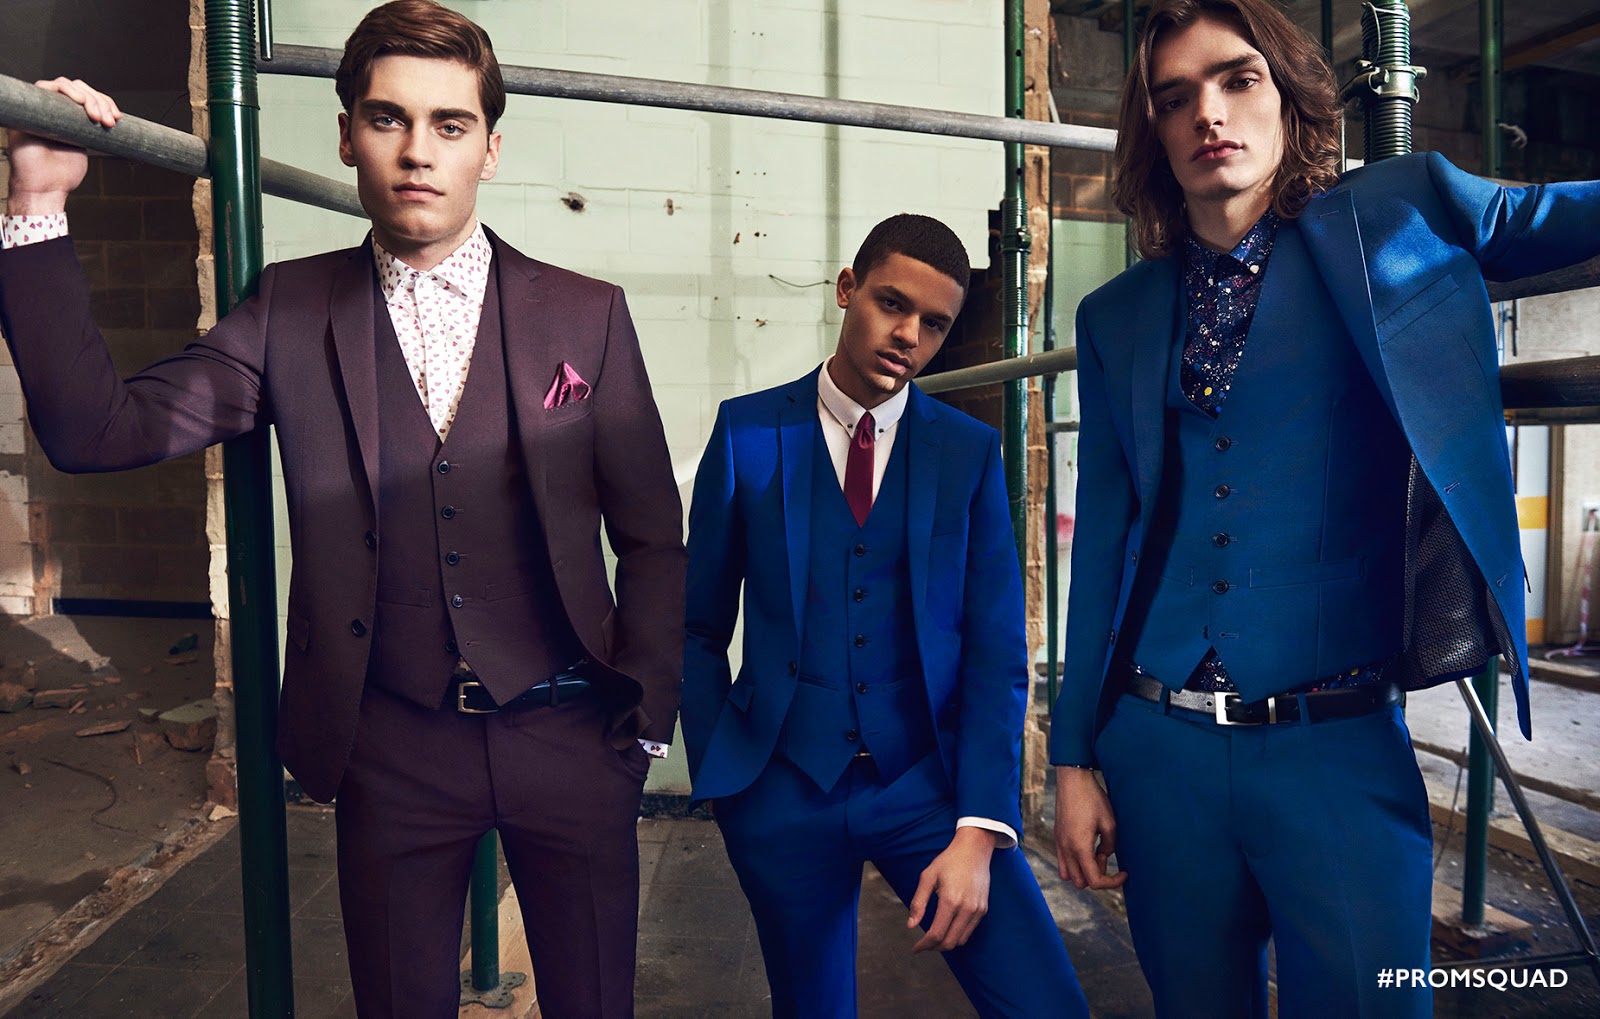 #PromSquad - The Moss Bros. definitive guide to dressing for Prom